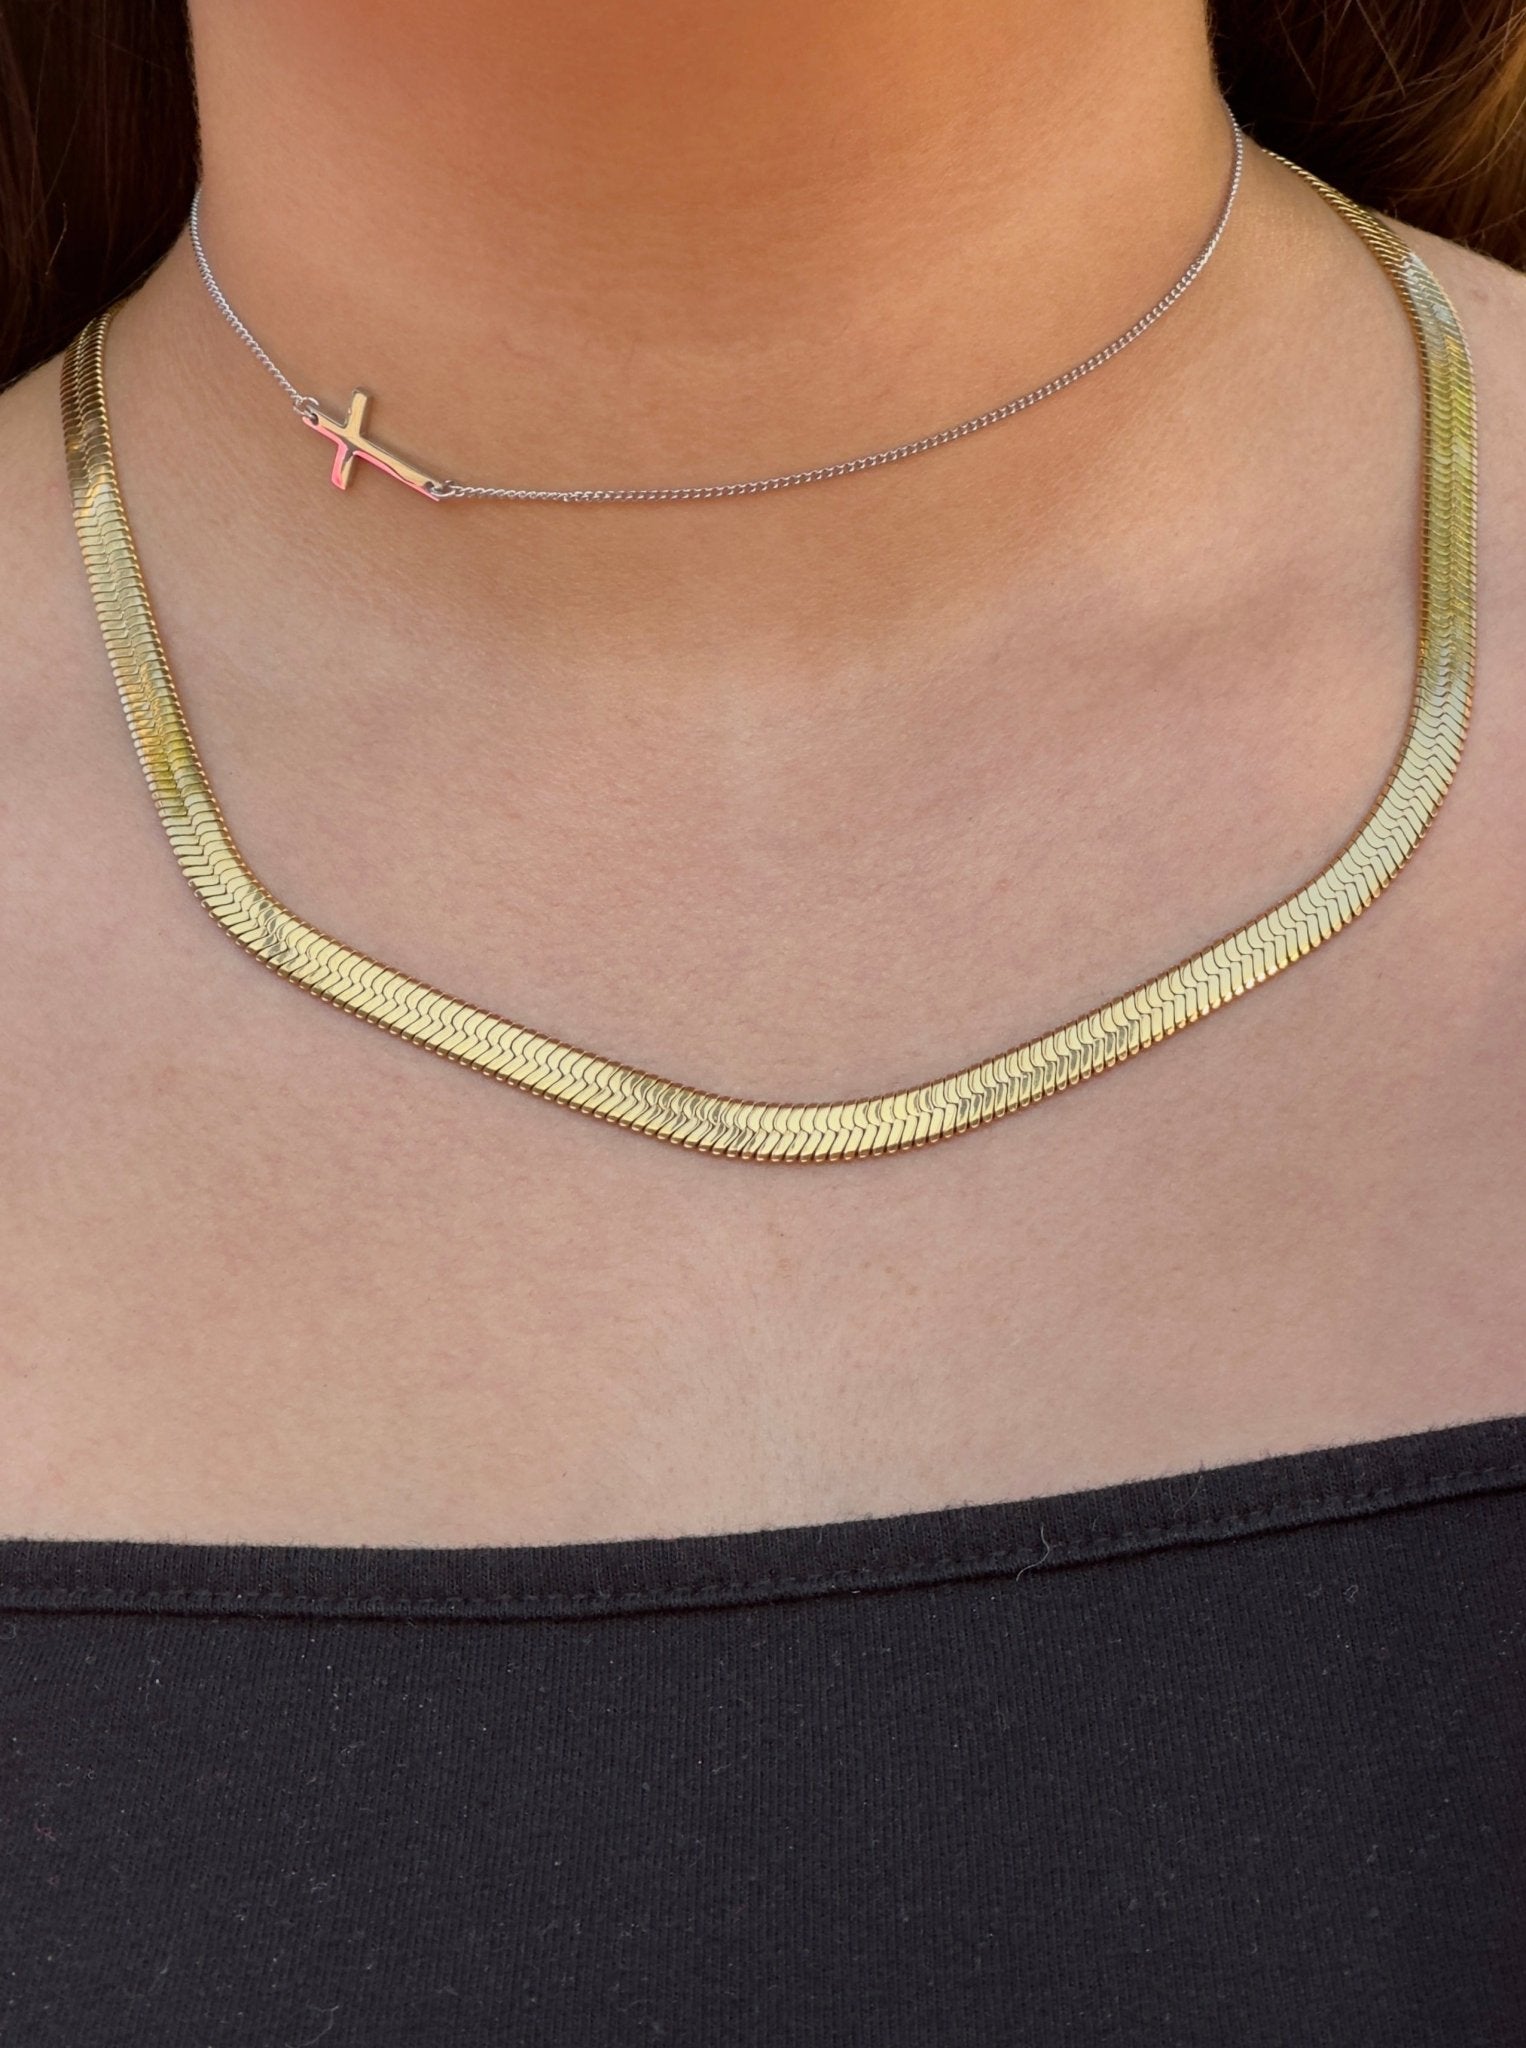 Flat Snake Necklace Chain Herringbone Necklace